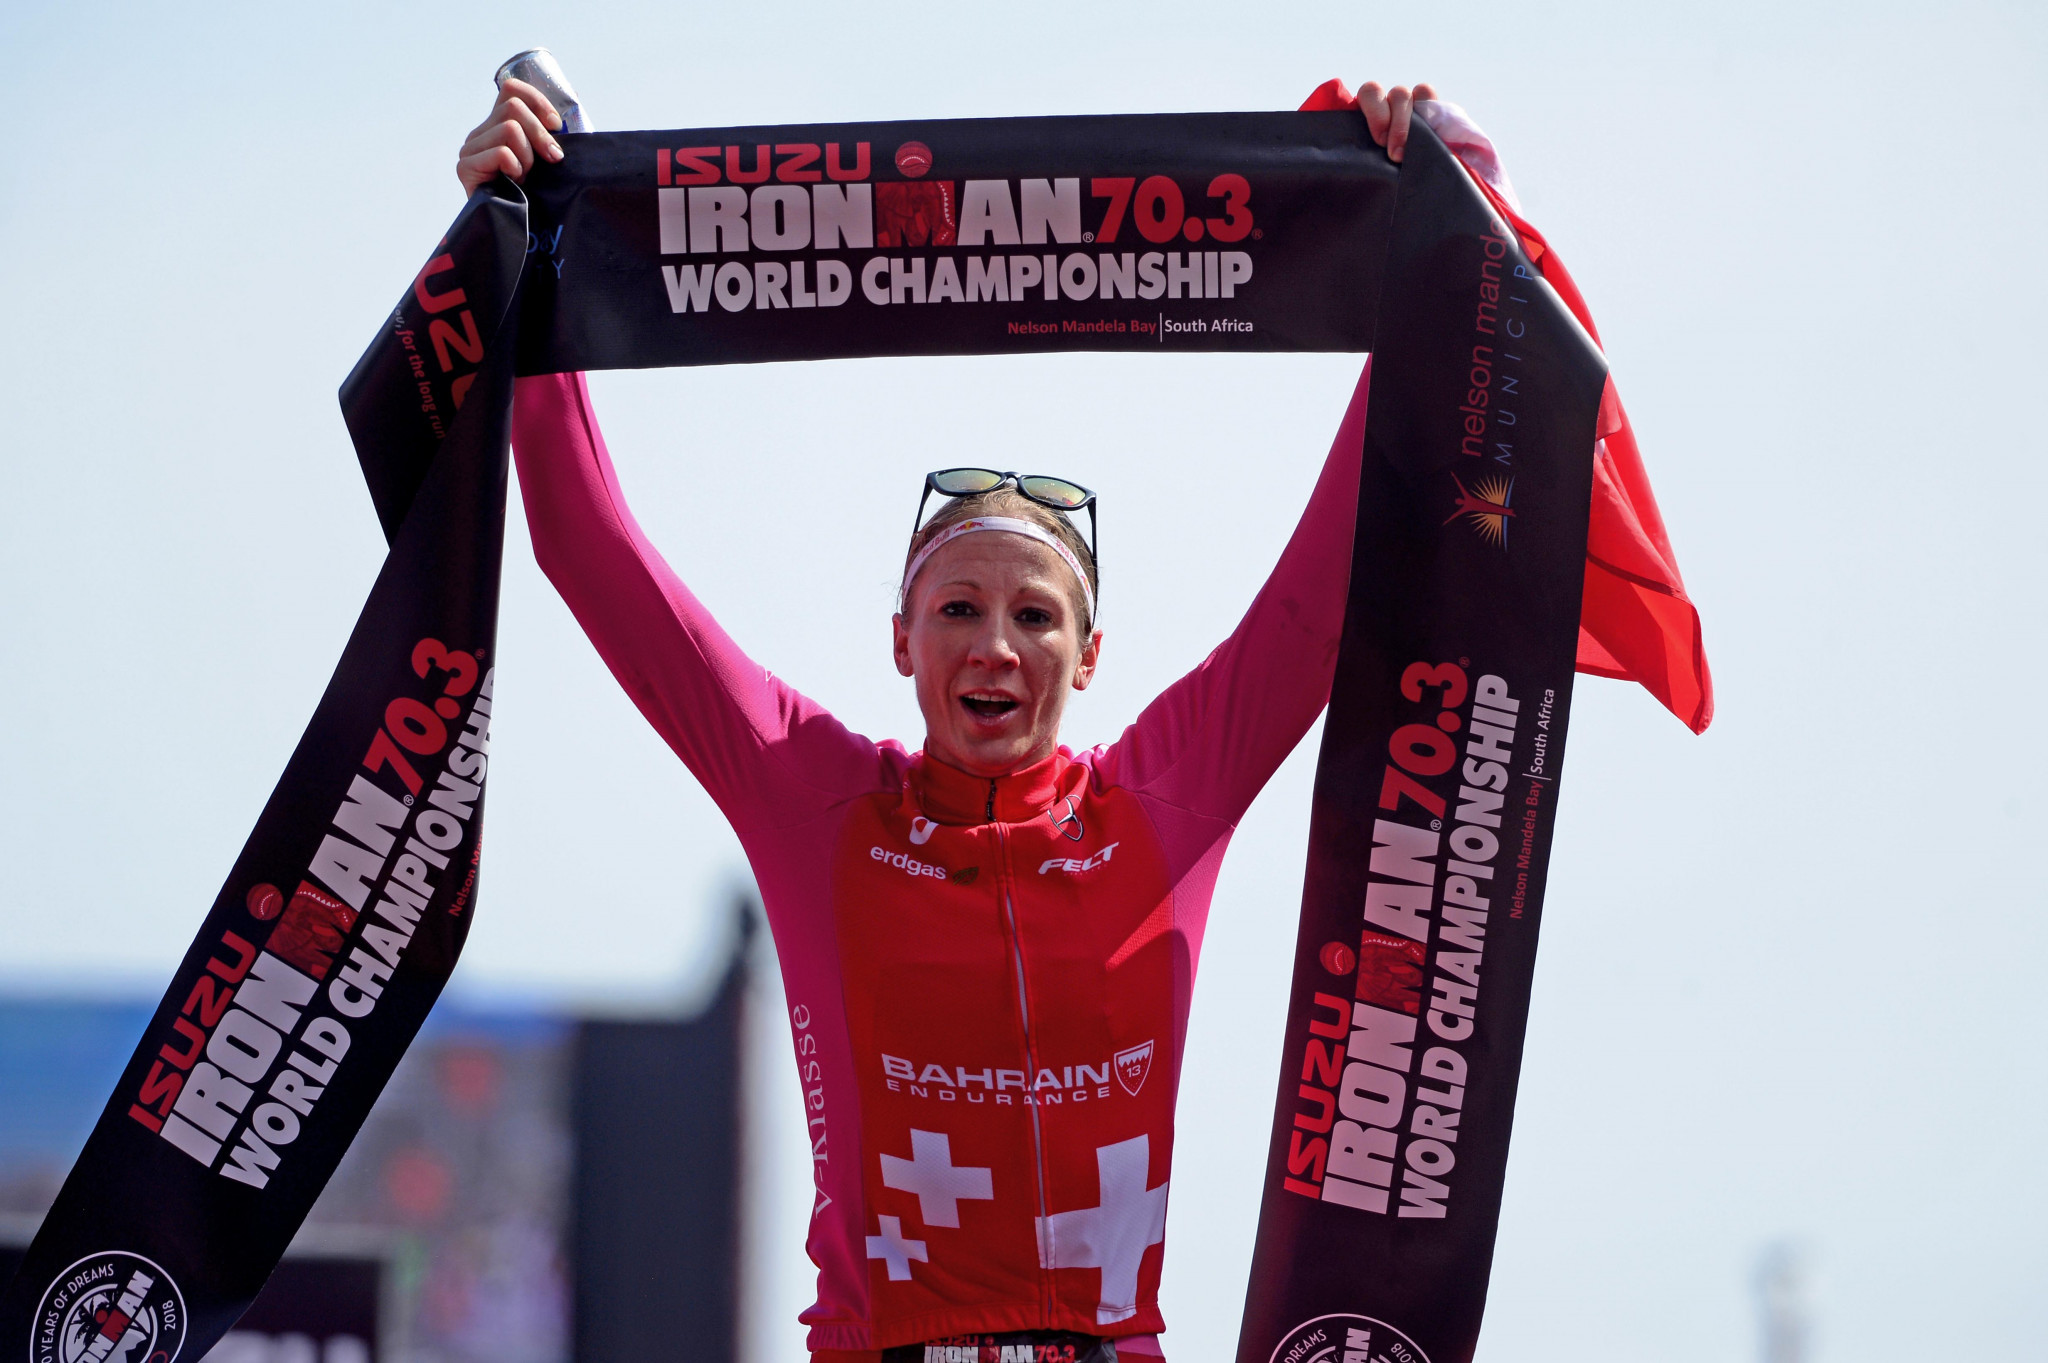 Ryf wins fourth Ironman 70.3 World Championship title in South Africa